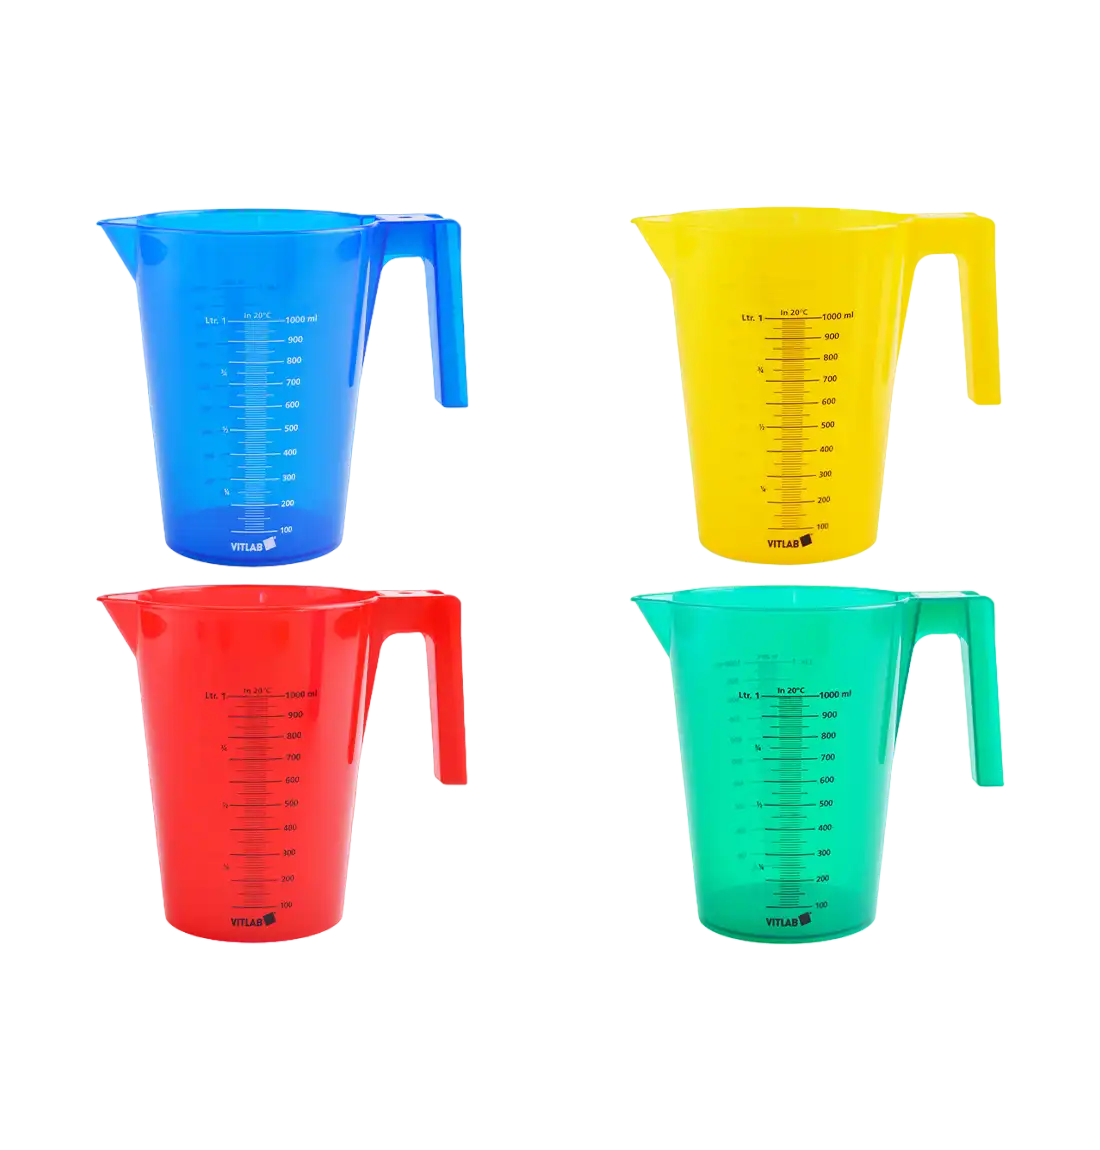 Beaker, P.P, with Handle, Black Scale on Both Sides, Conical (Stackable), 100 mm Diameter, 140 mm Height, 10 ml Subdivision, Blue-Yellow-Red-Green Set, 500 ml Volume, 4 pcs/pack